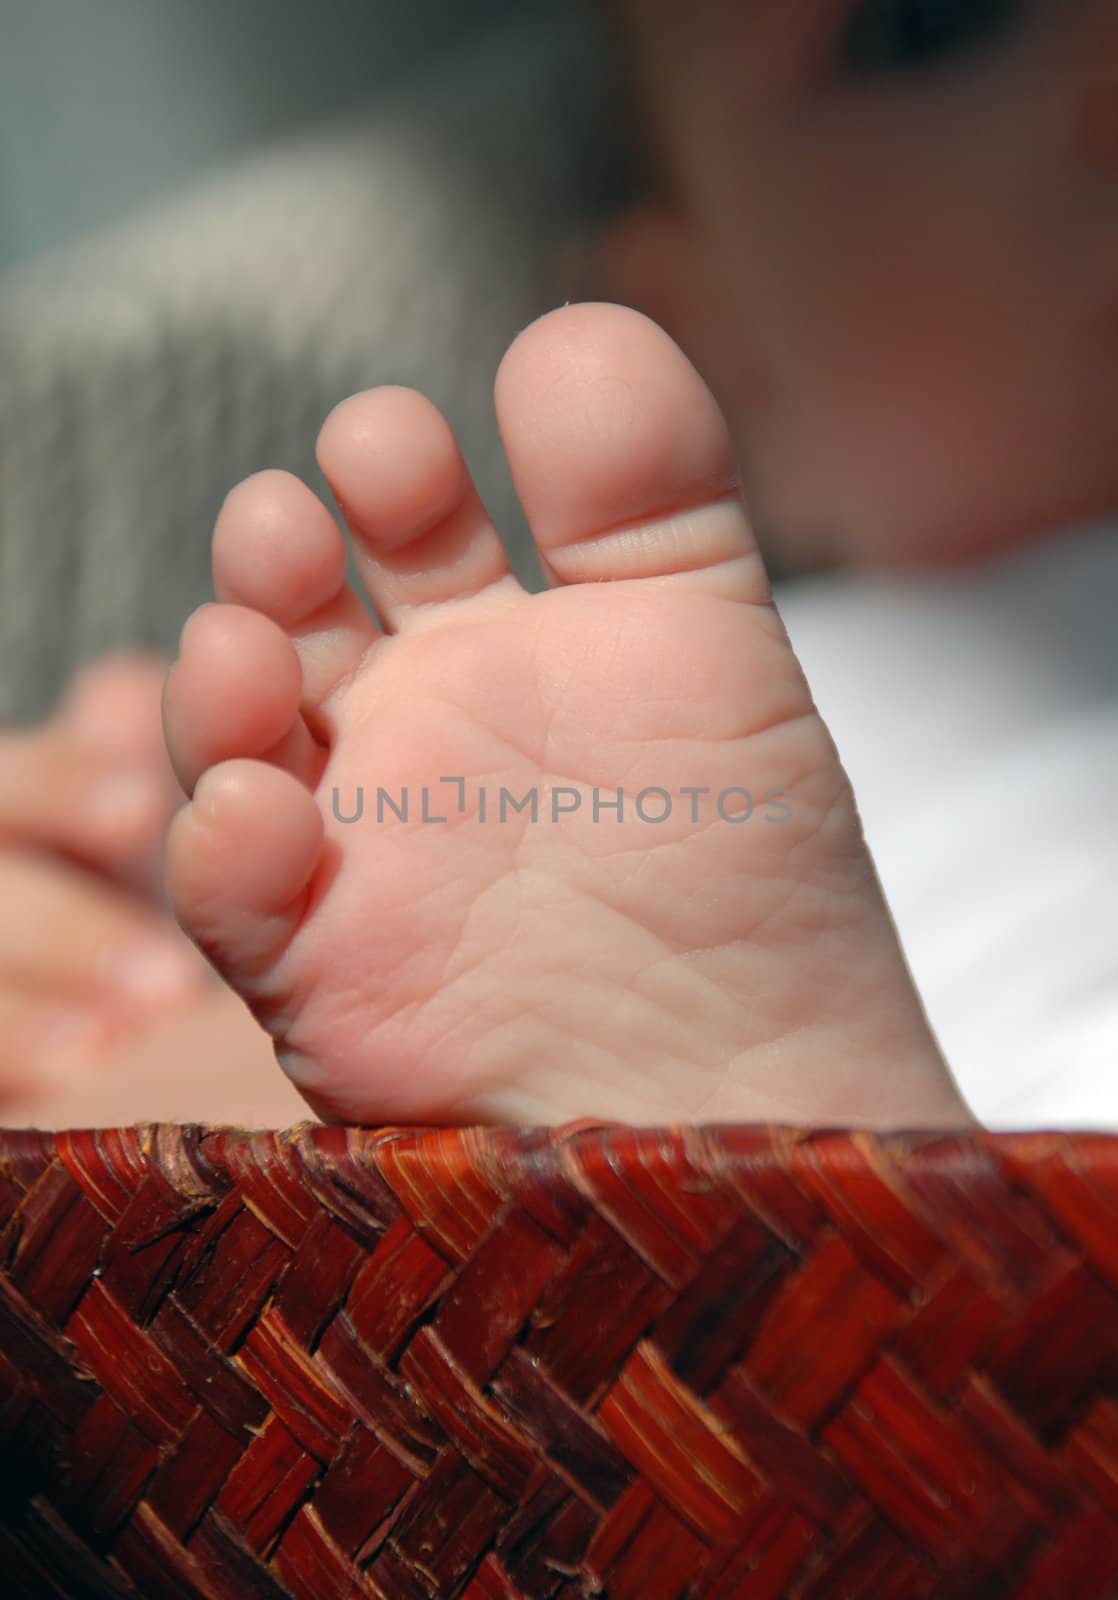 Foot baby looking out from basket